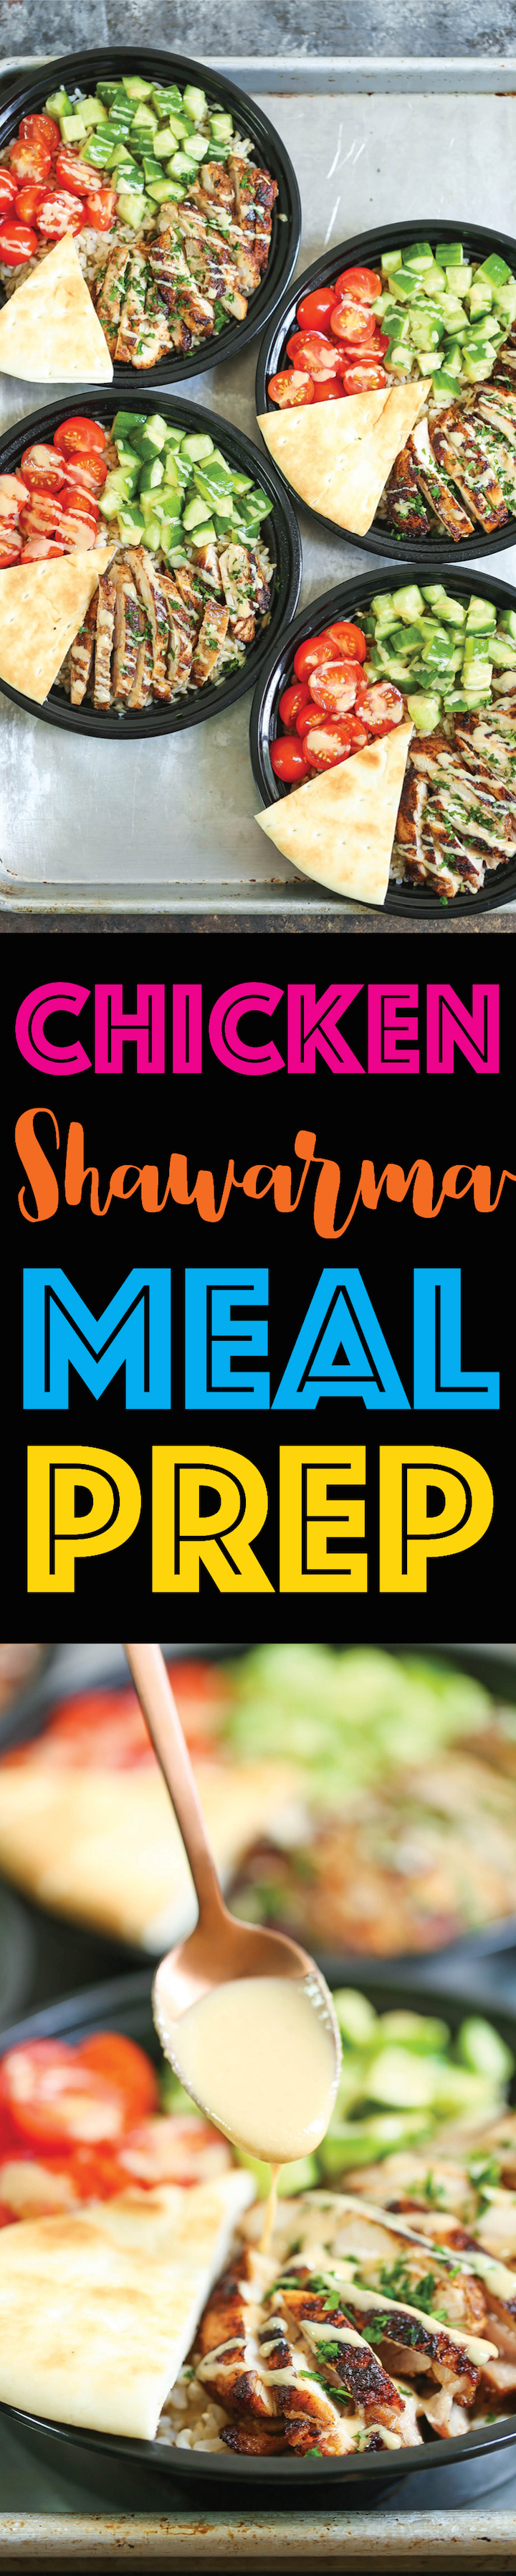 Chicken Shawarma Meal Prep - Prep for the week ahead for the easiest HOMEMADE chicken shawarma bowls with cucumber, tomato, pita bread and tahini sauce!!!